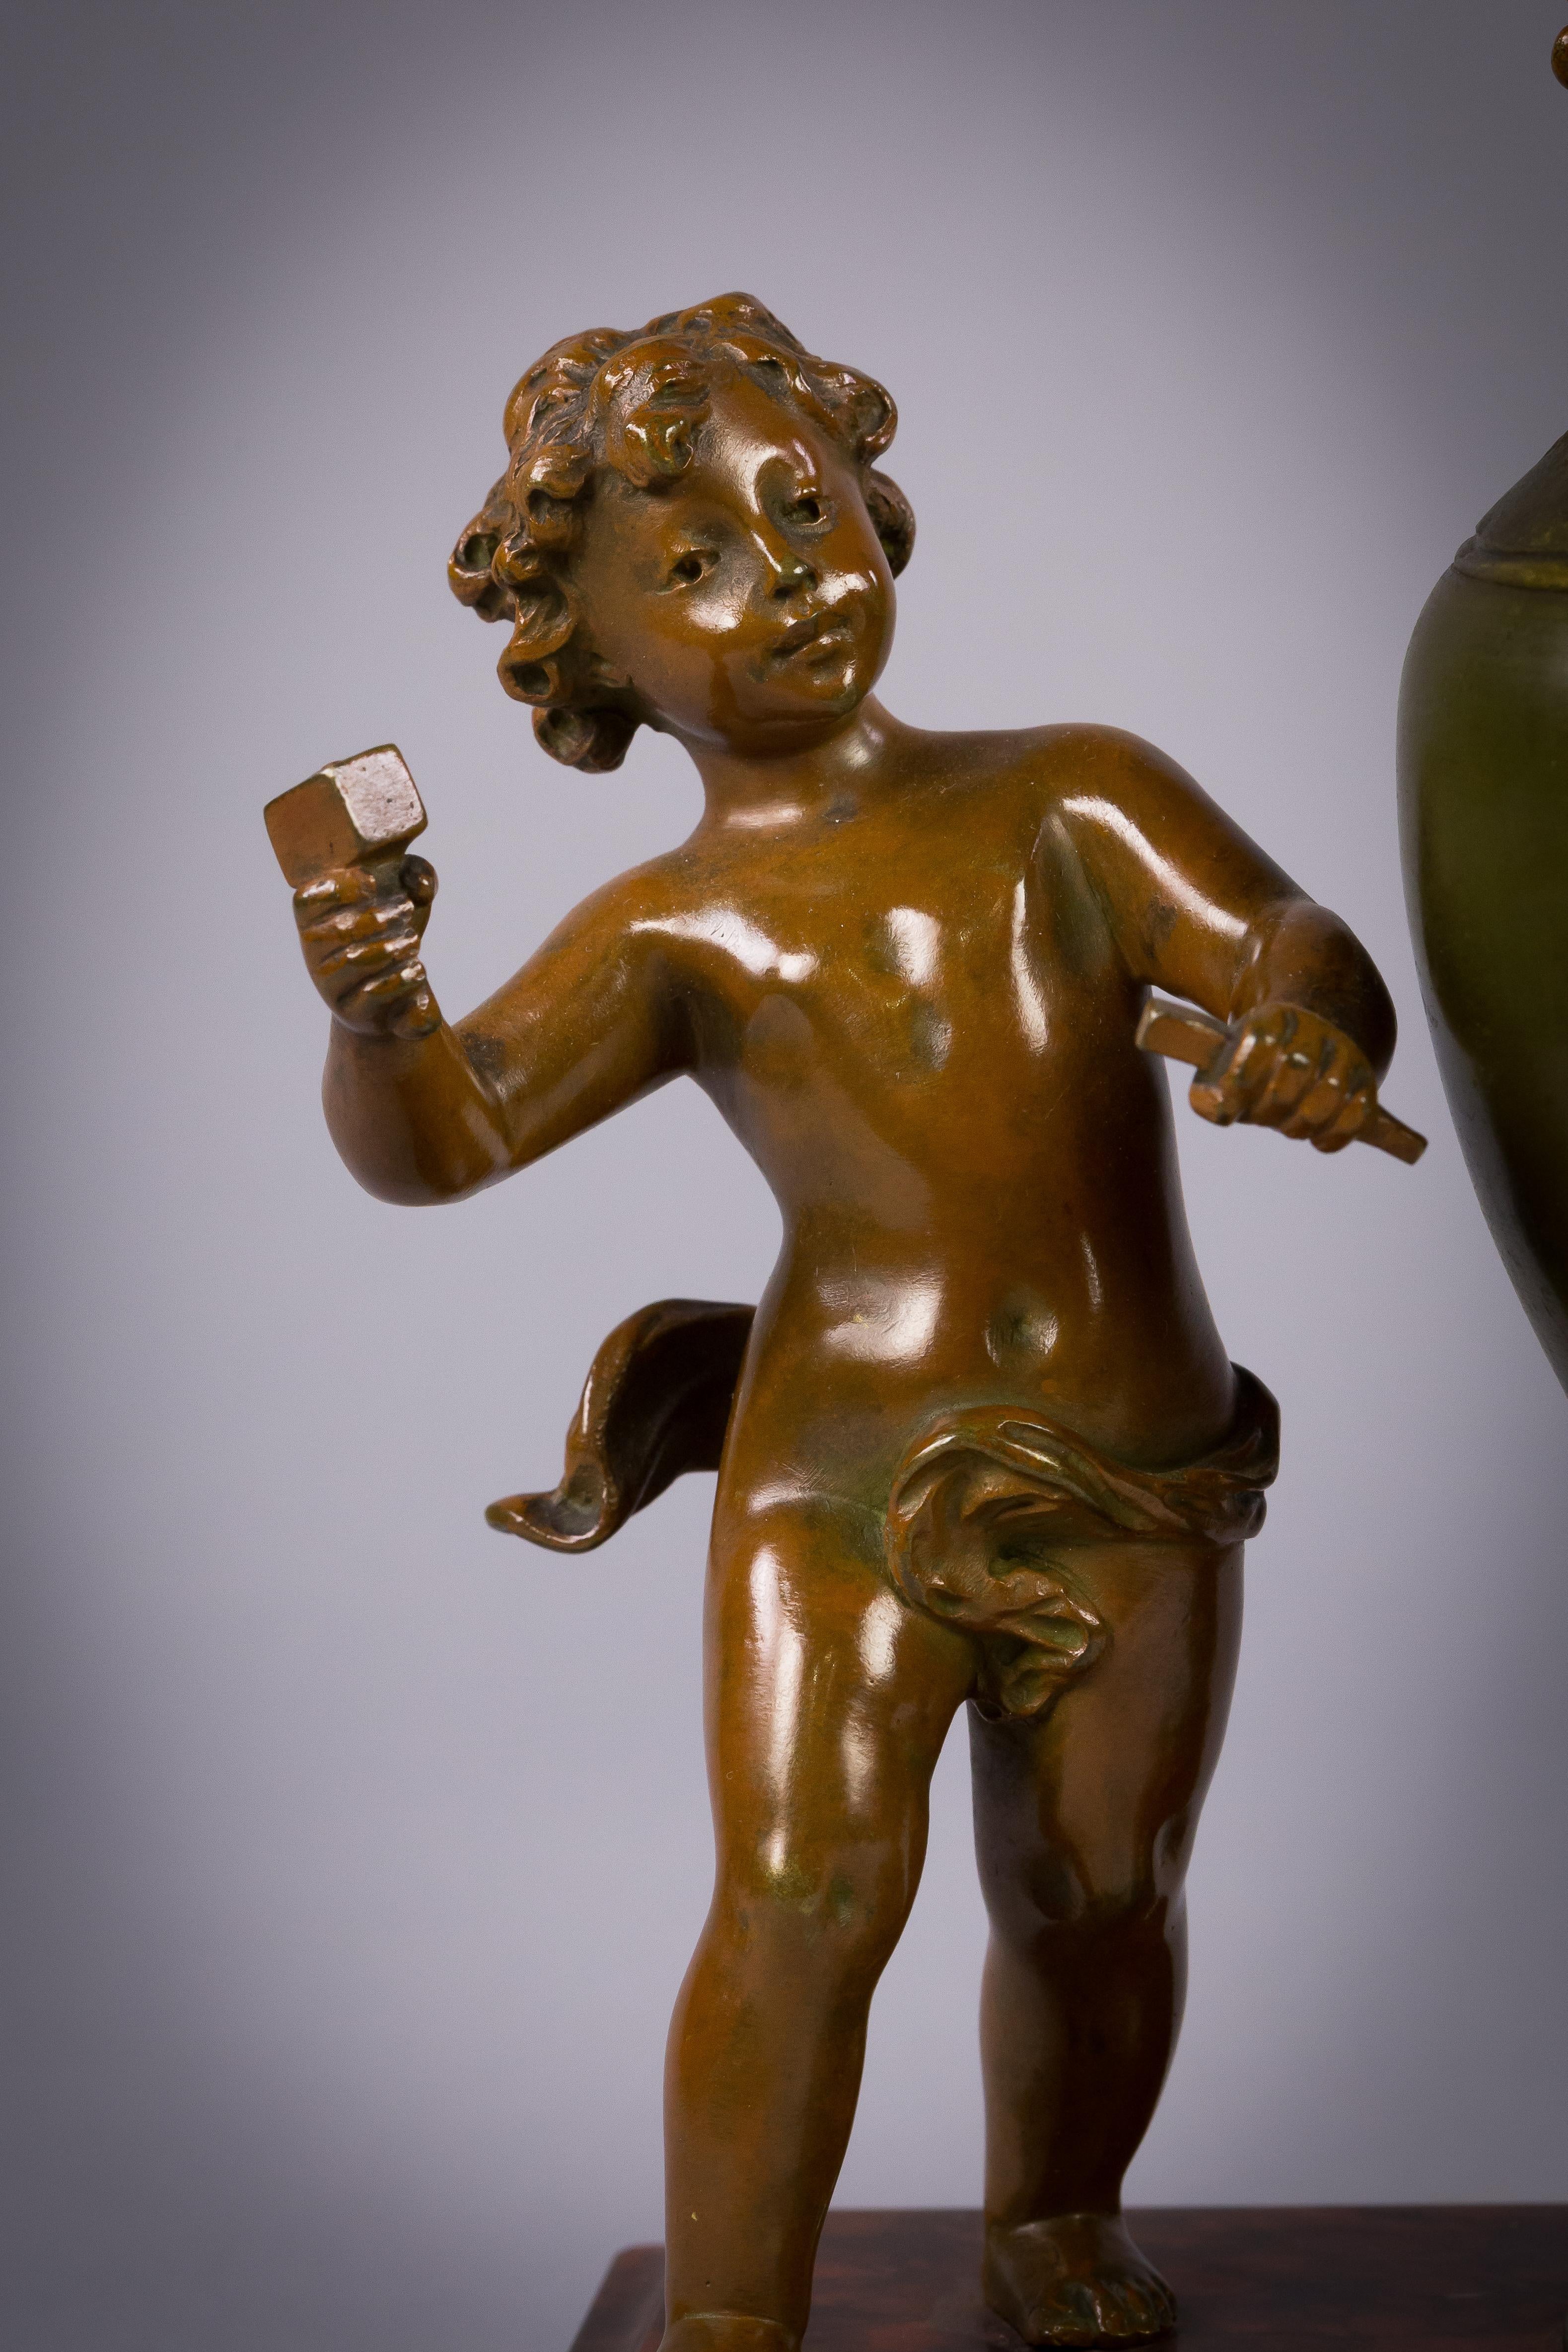 Depicting a figure chasing the bronze vase on rouge marble base.